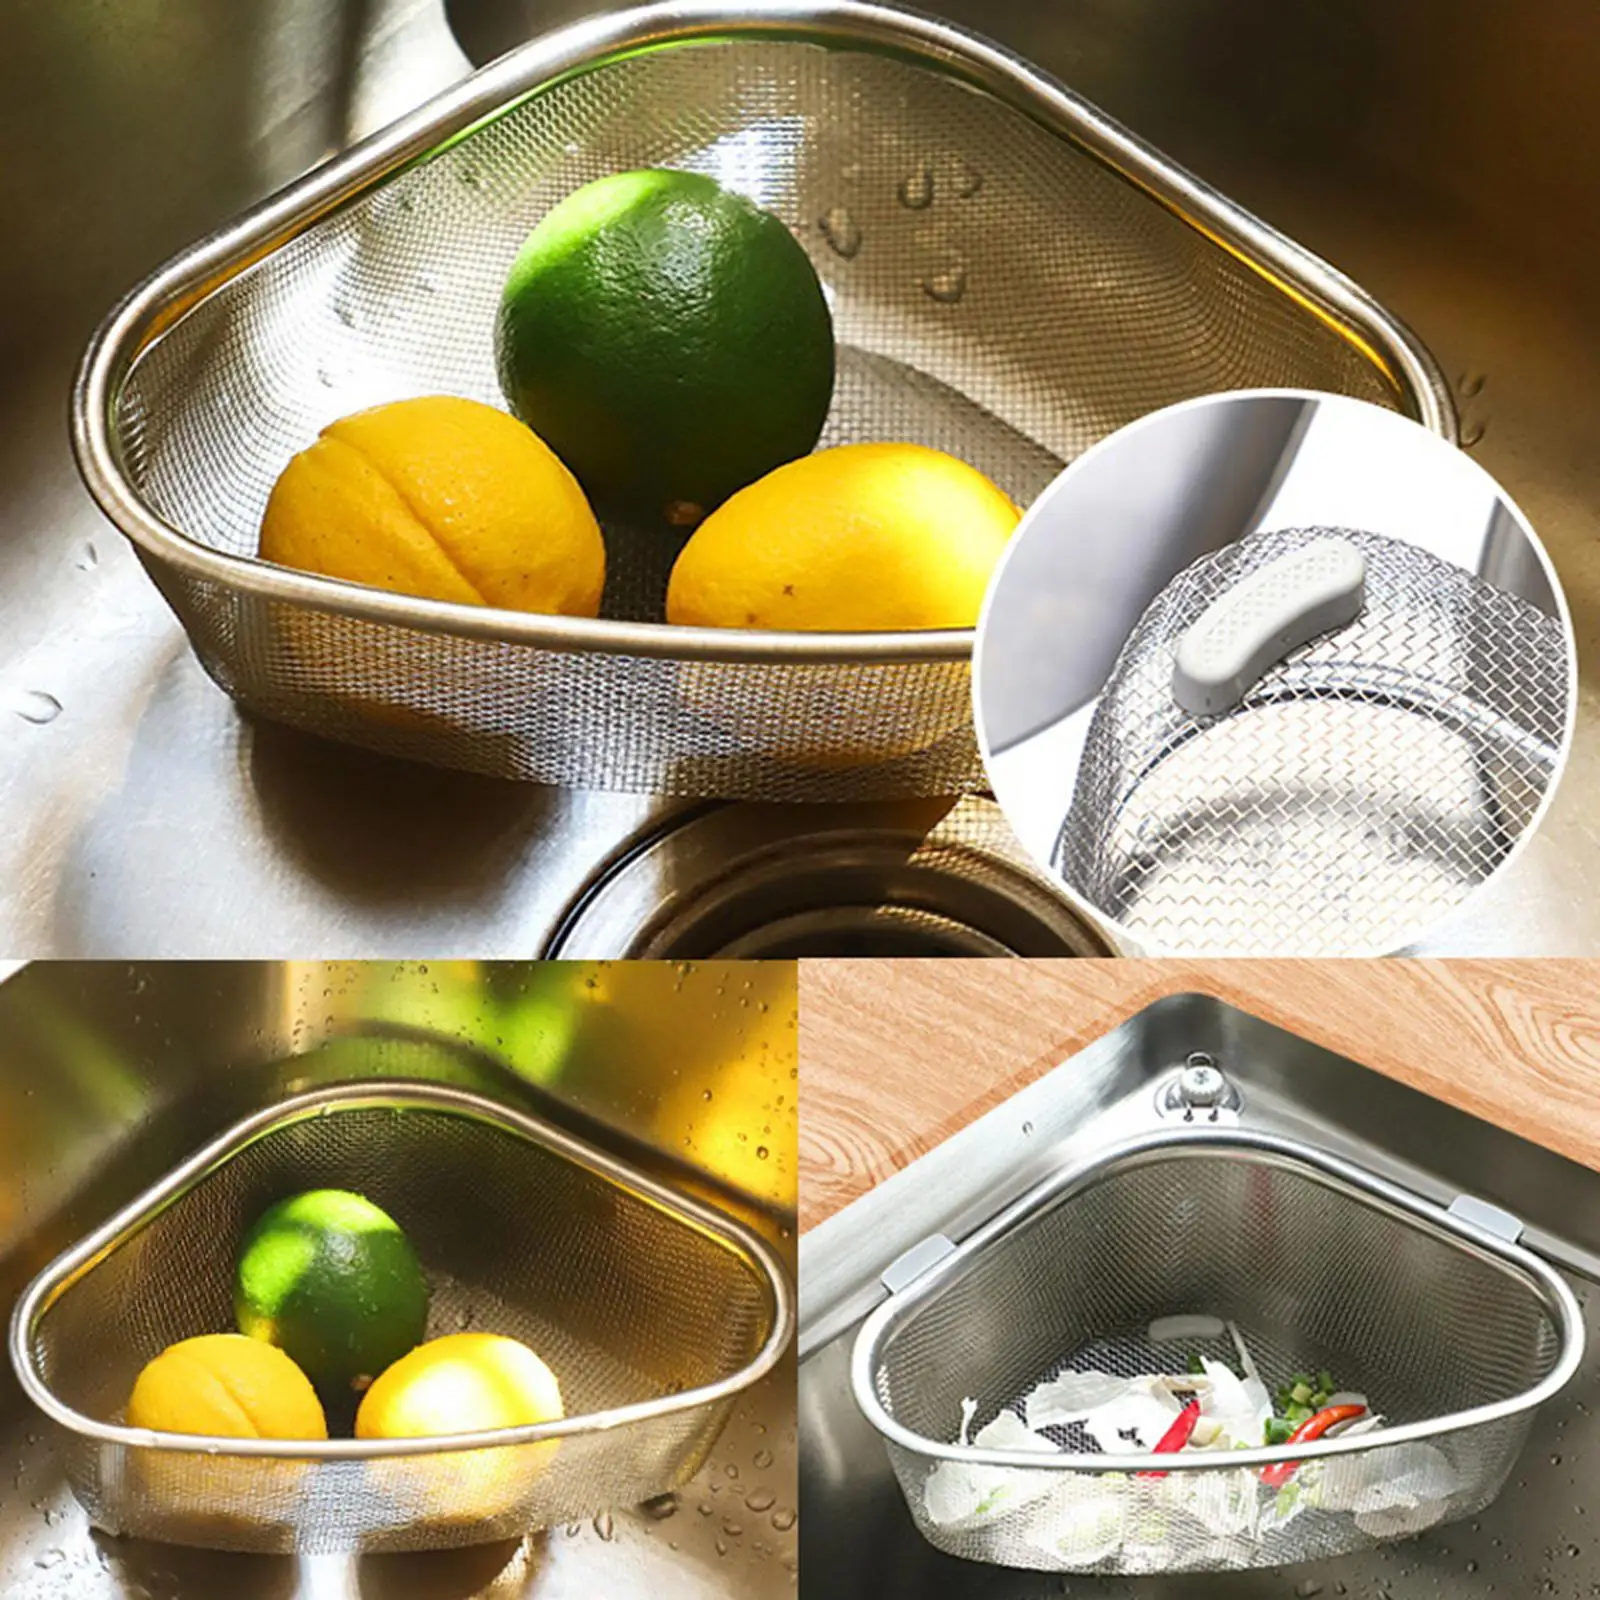 Durable Over The Sink Colander Strainer Basket for Filtering, Straining Out Impurities Multiple Uses Clean Handy Tool